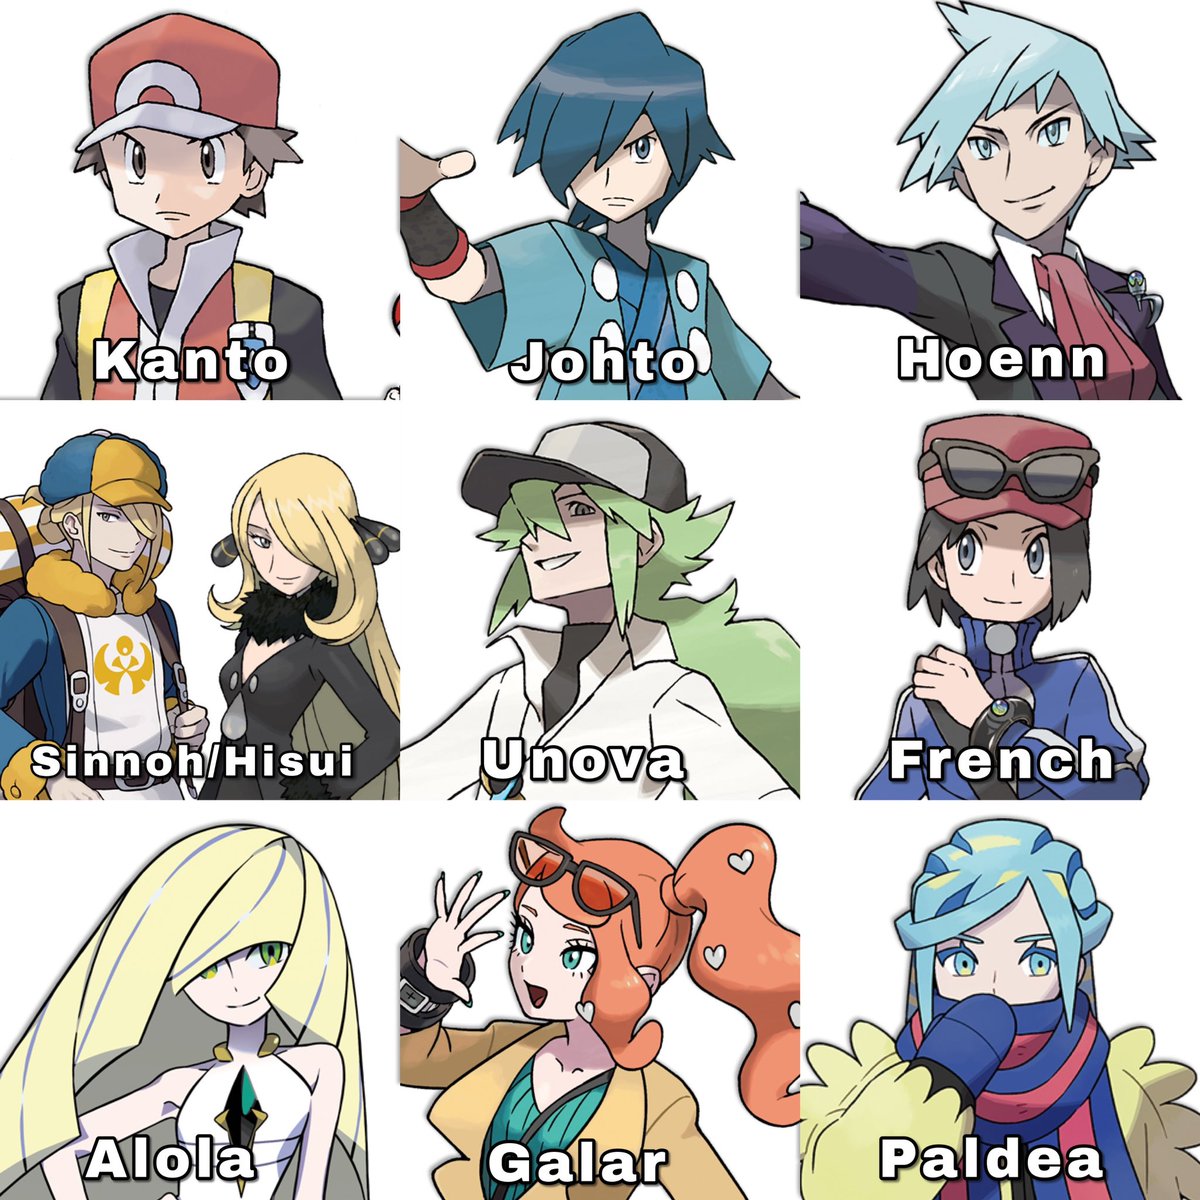 Here's my fave Pokemon characters from each region - thoughts?? 